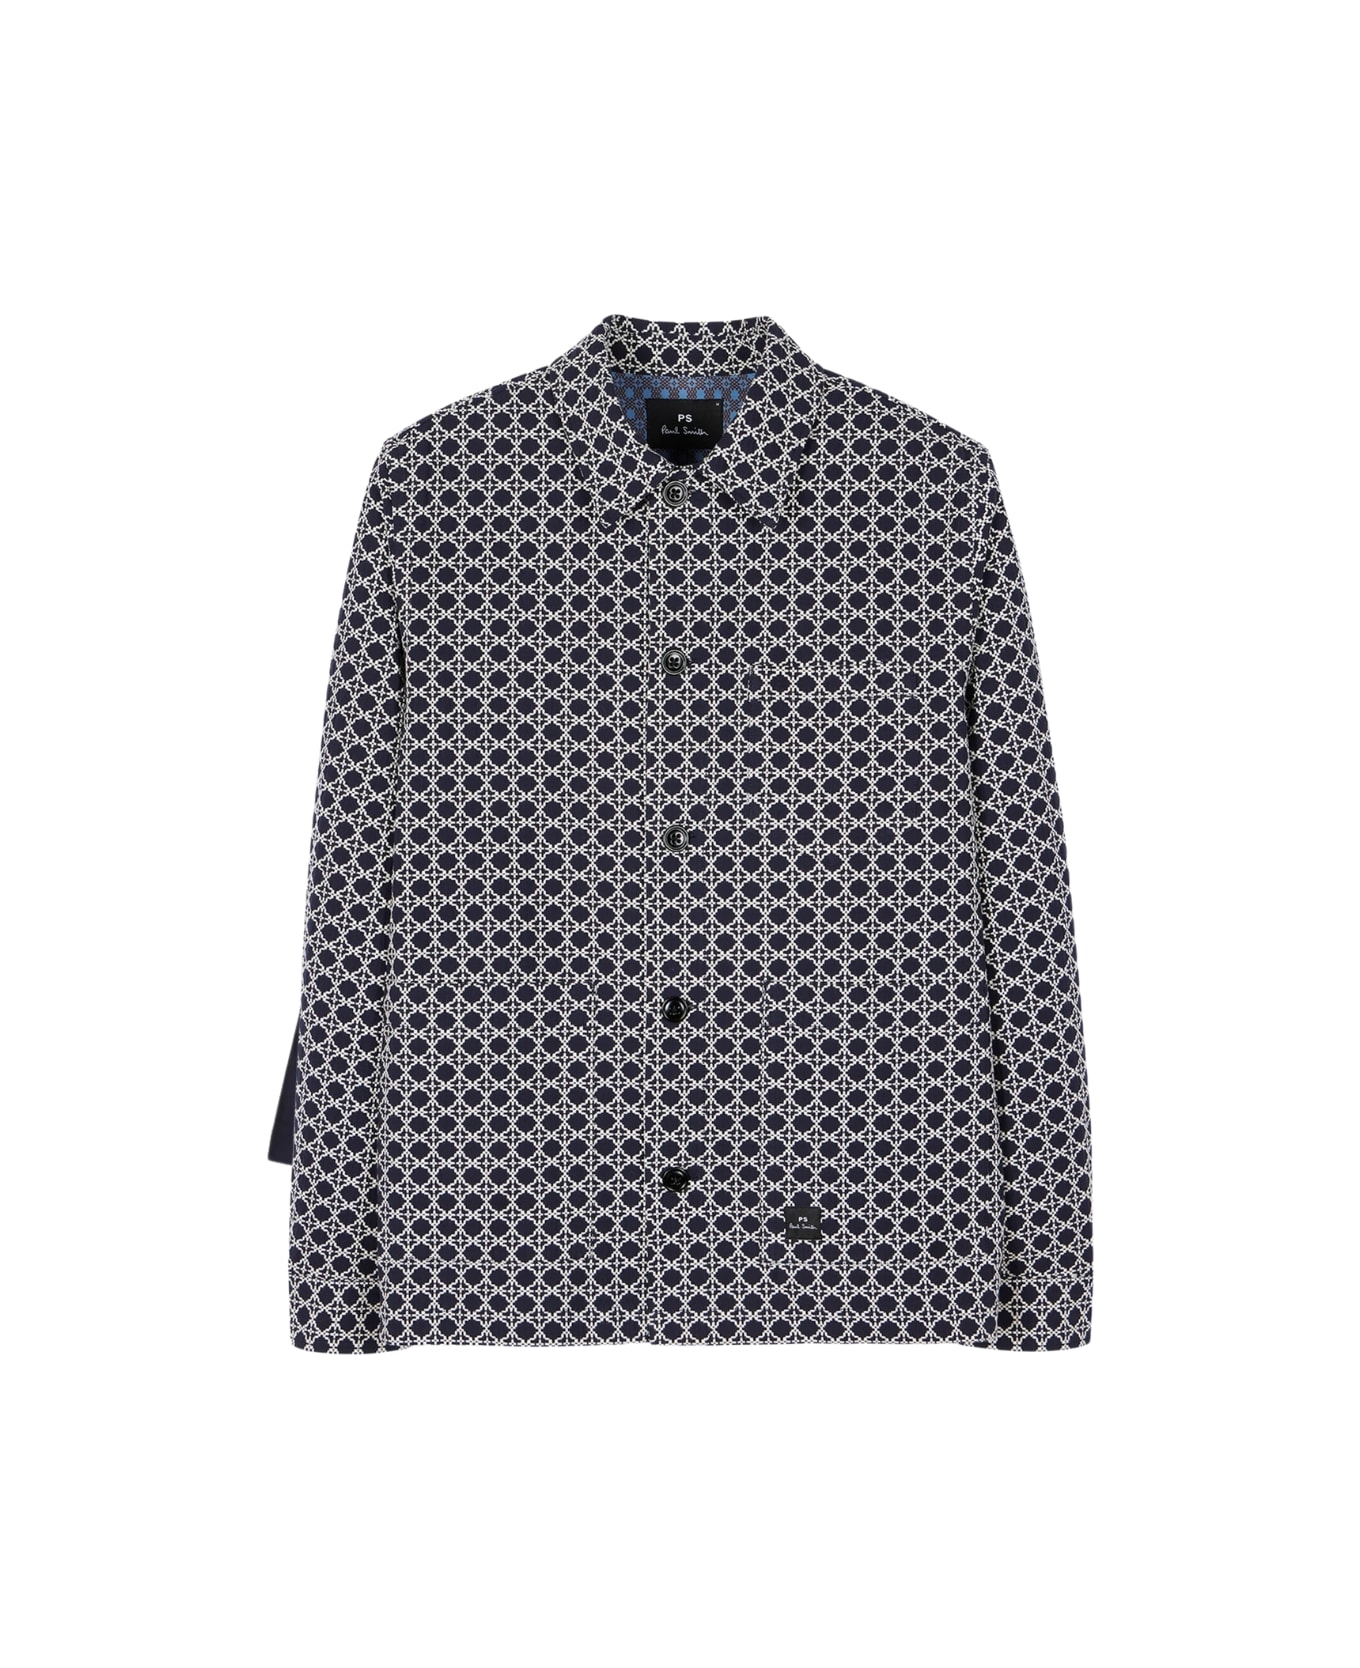 PS by Paul Smith Mens Jacket - Blues